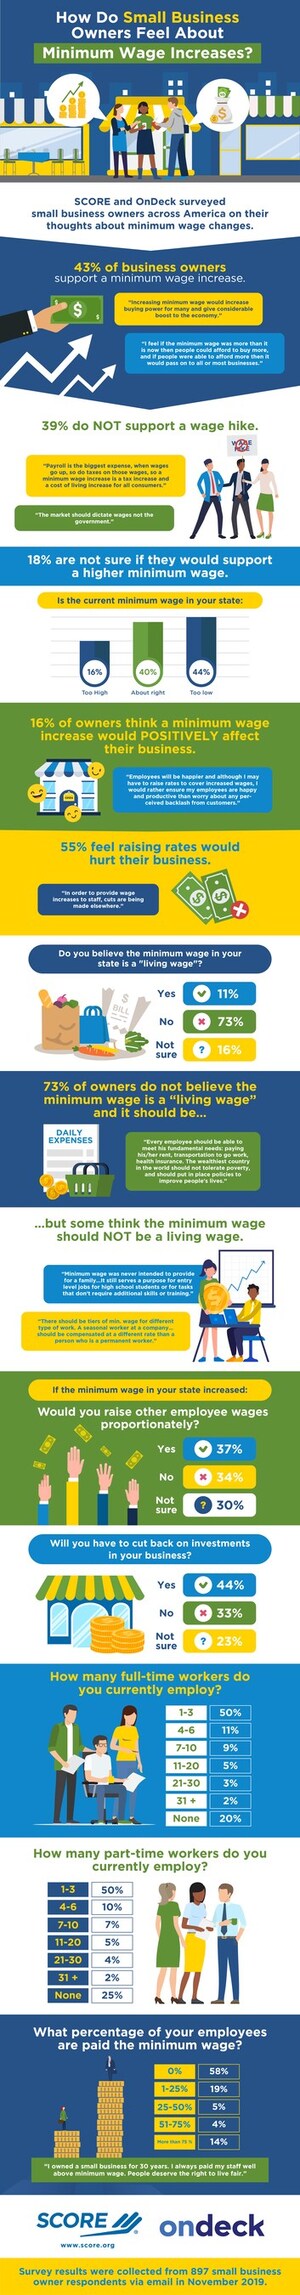 Small Business Owners Agree Minimum Wage Is Not a "Living Wage;" Split on Whether It Should Increase